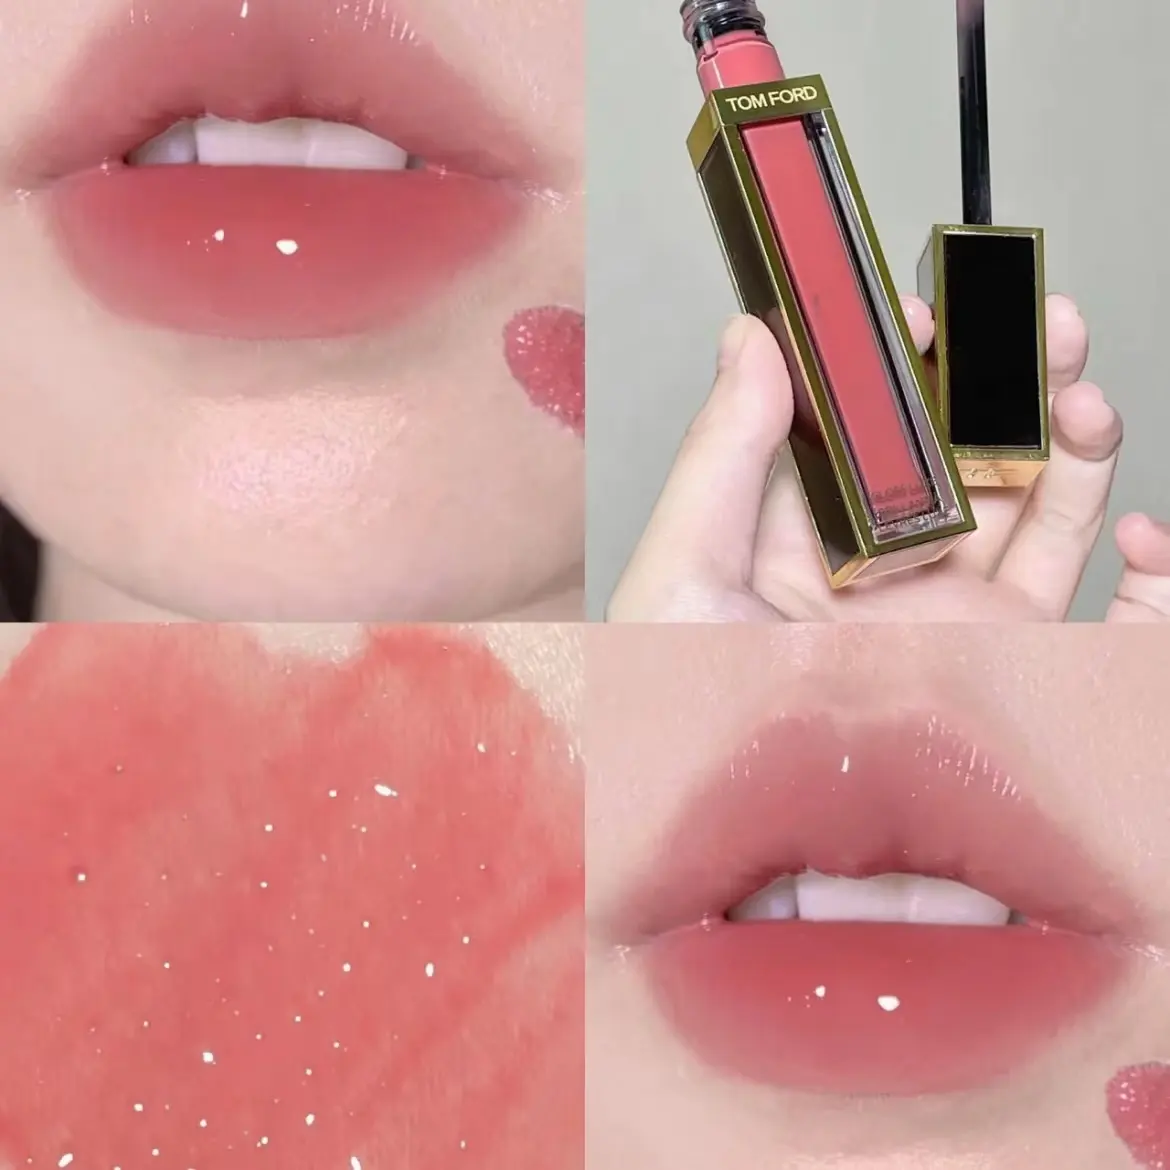 22 Sunrise pink 补货！Tom Ford Gloss Luxe镜面唇釉- 北美找丢网